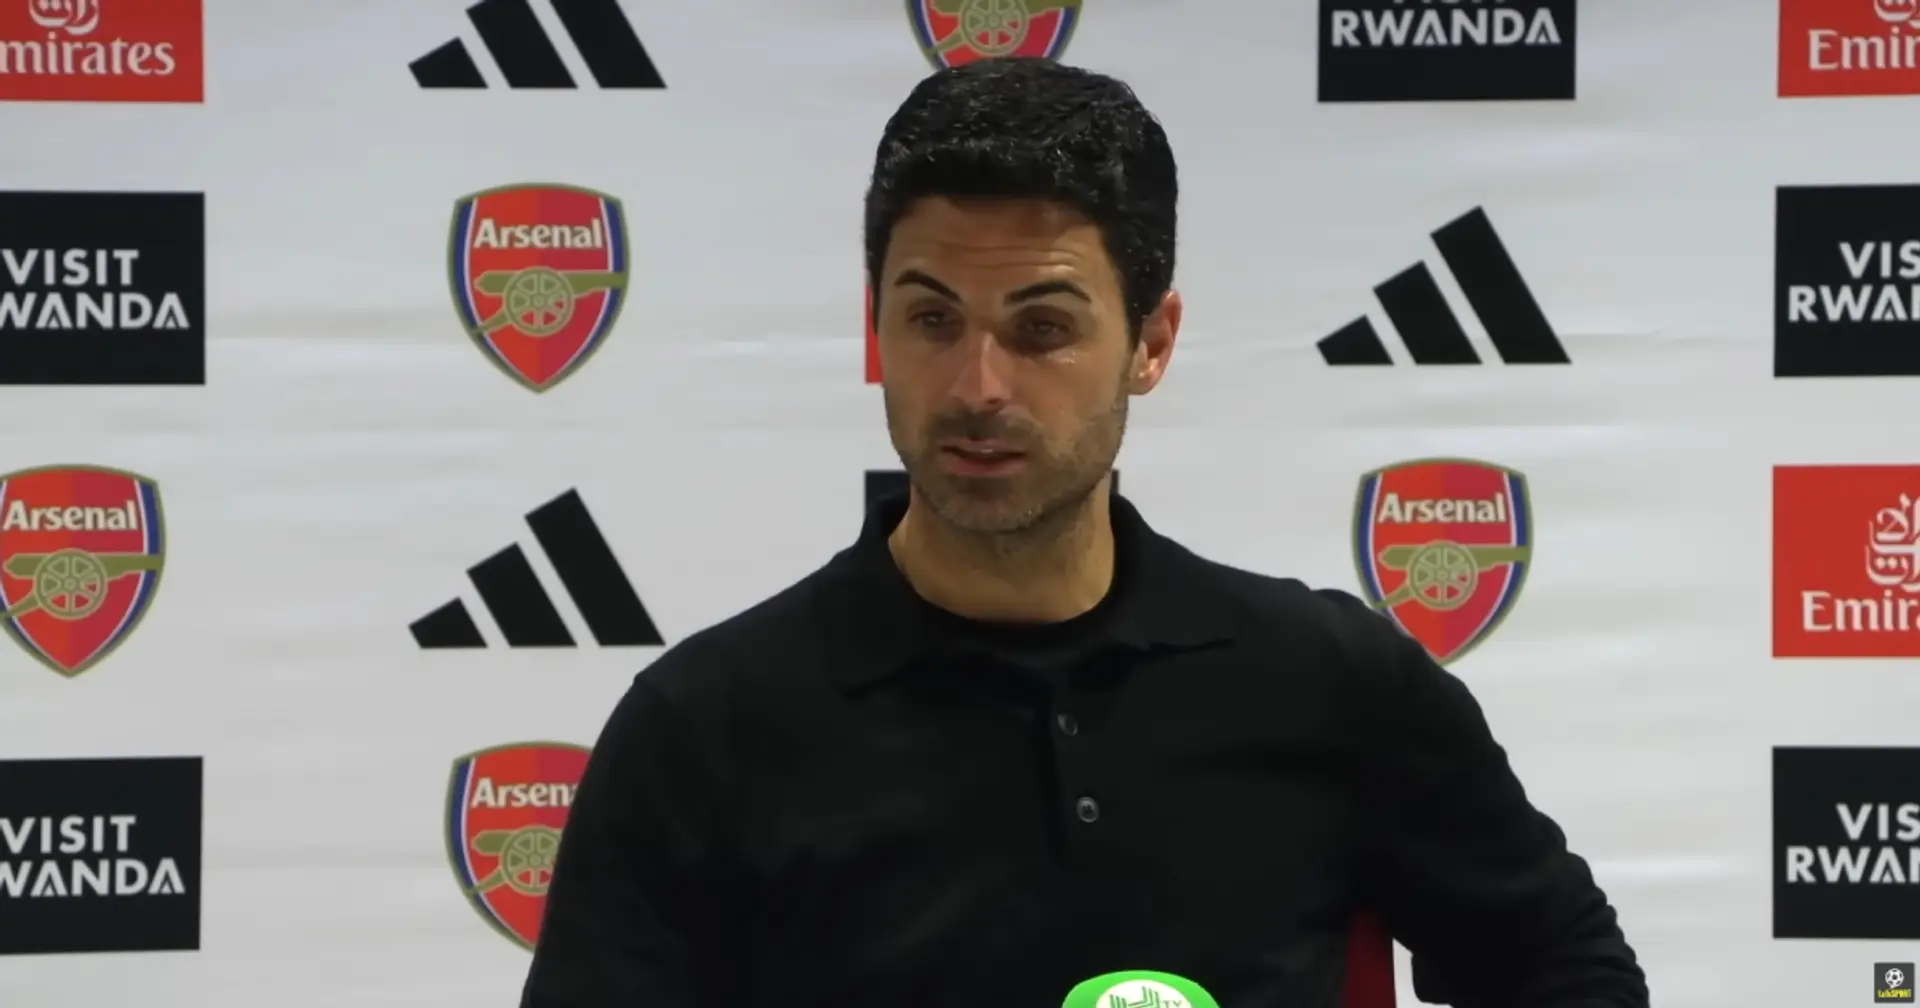 'I told them yesterday': Mikel Arteta claims he predicted Man United game